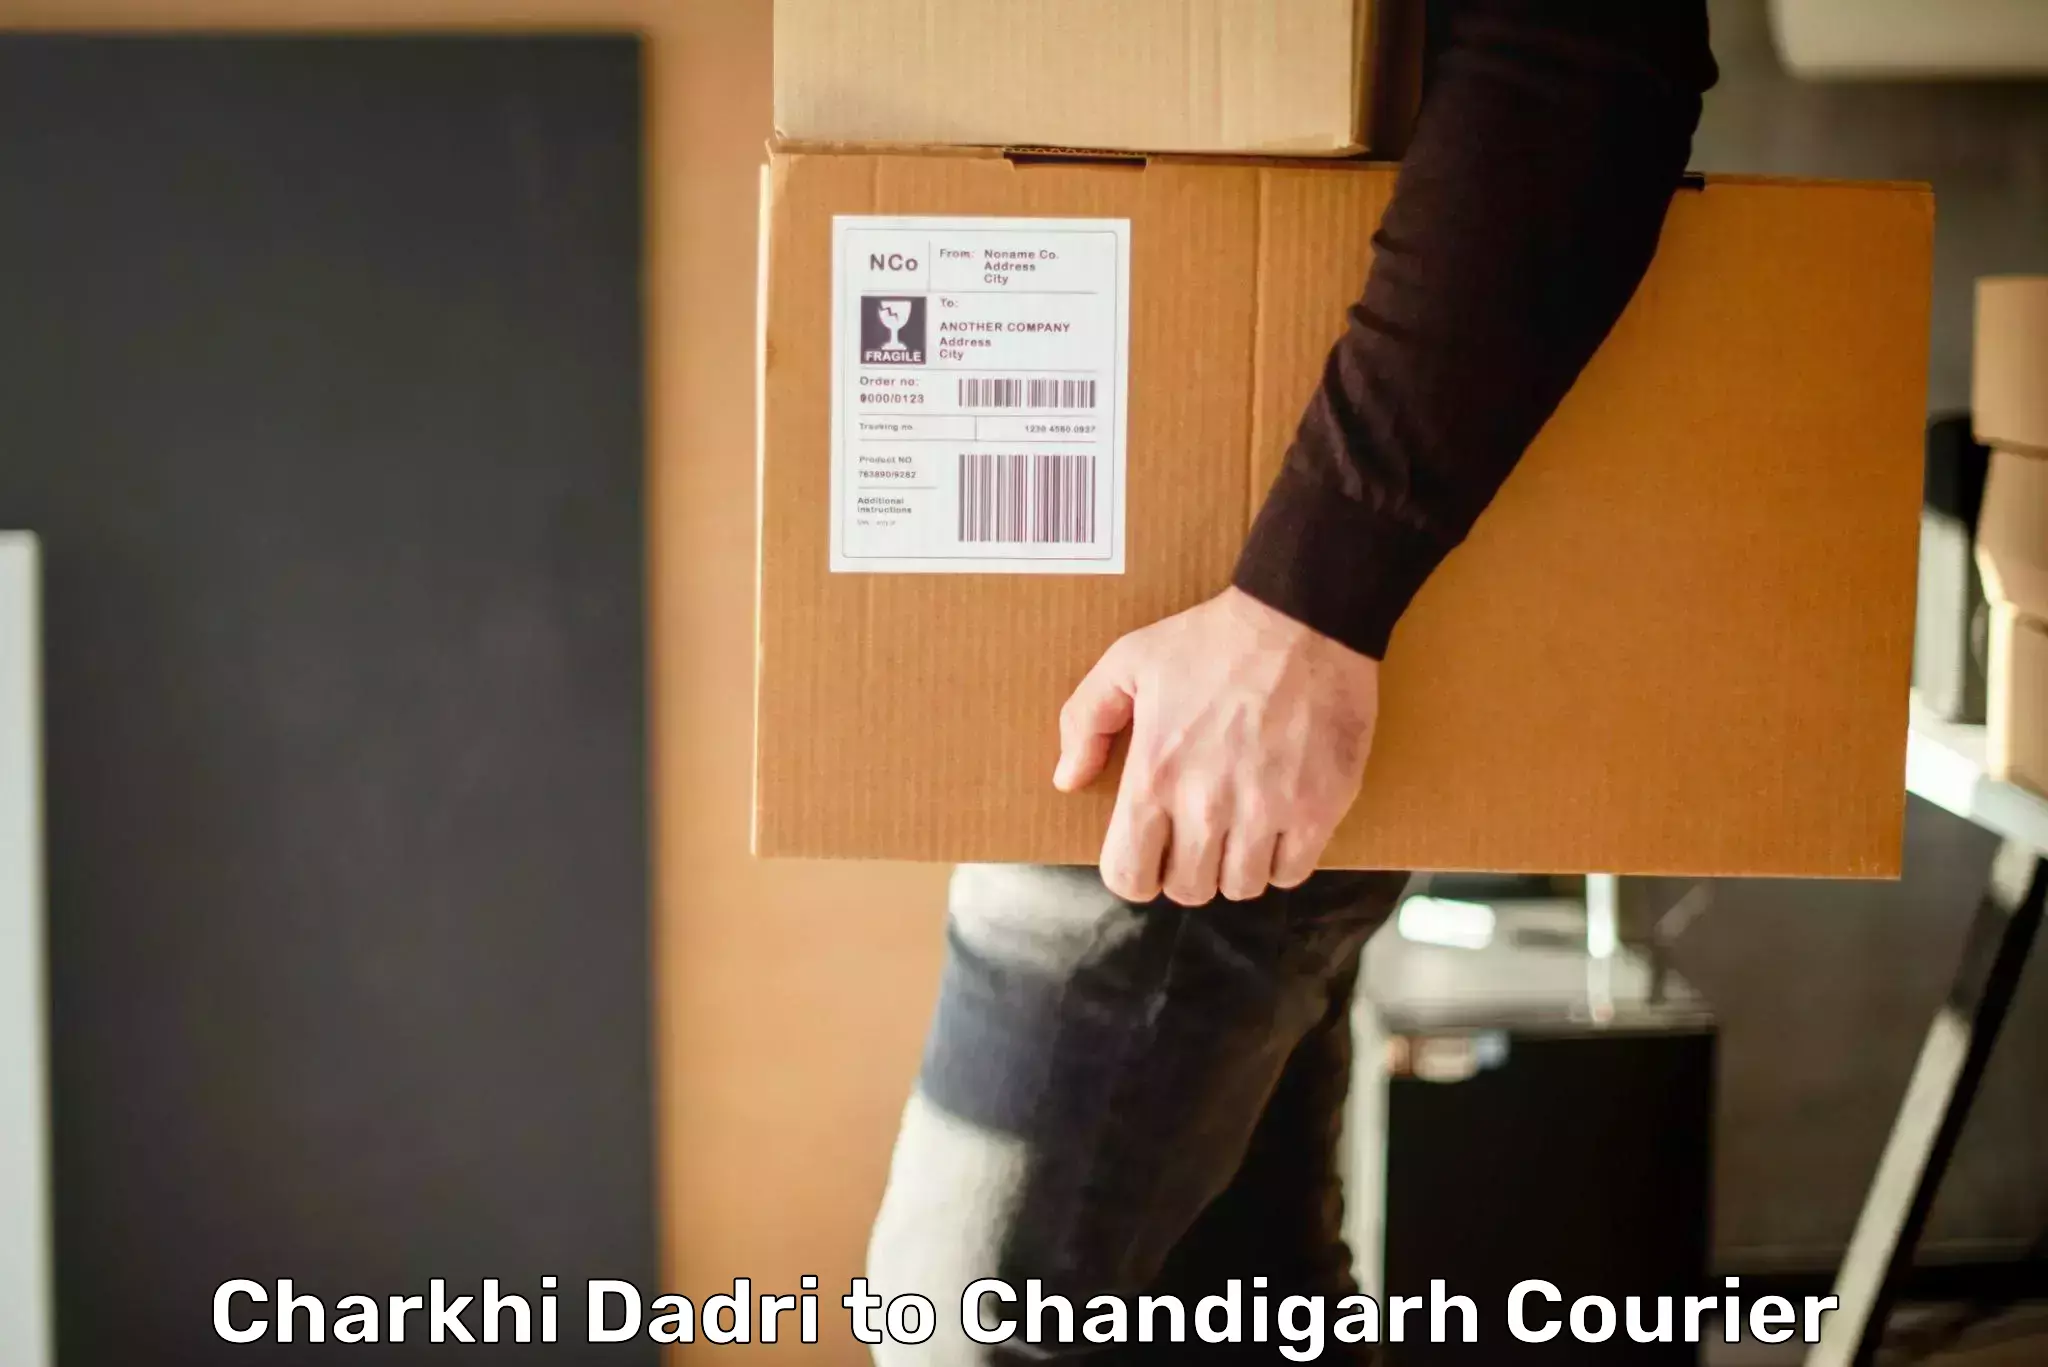 Courier service efficiency Charkhi Dadri to Chandigarh